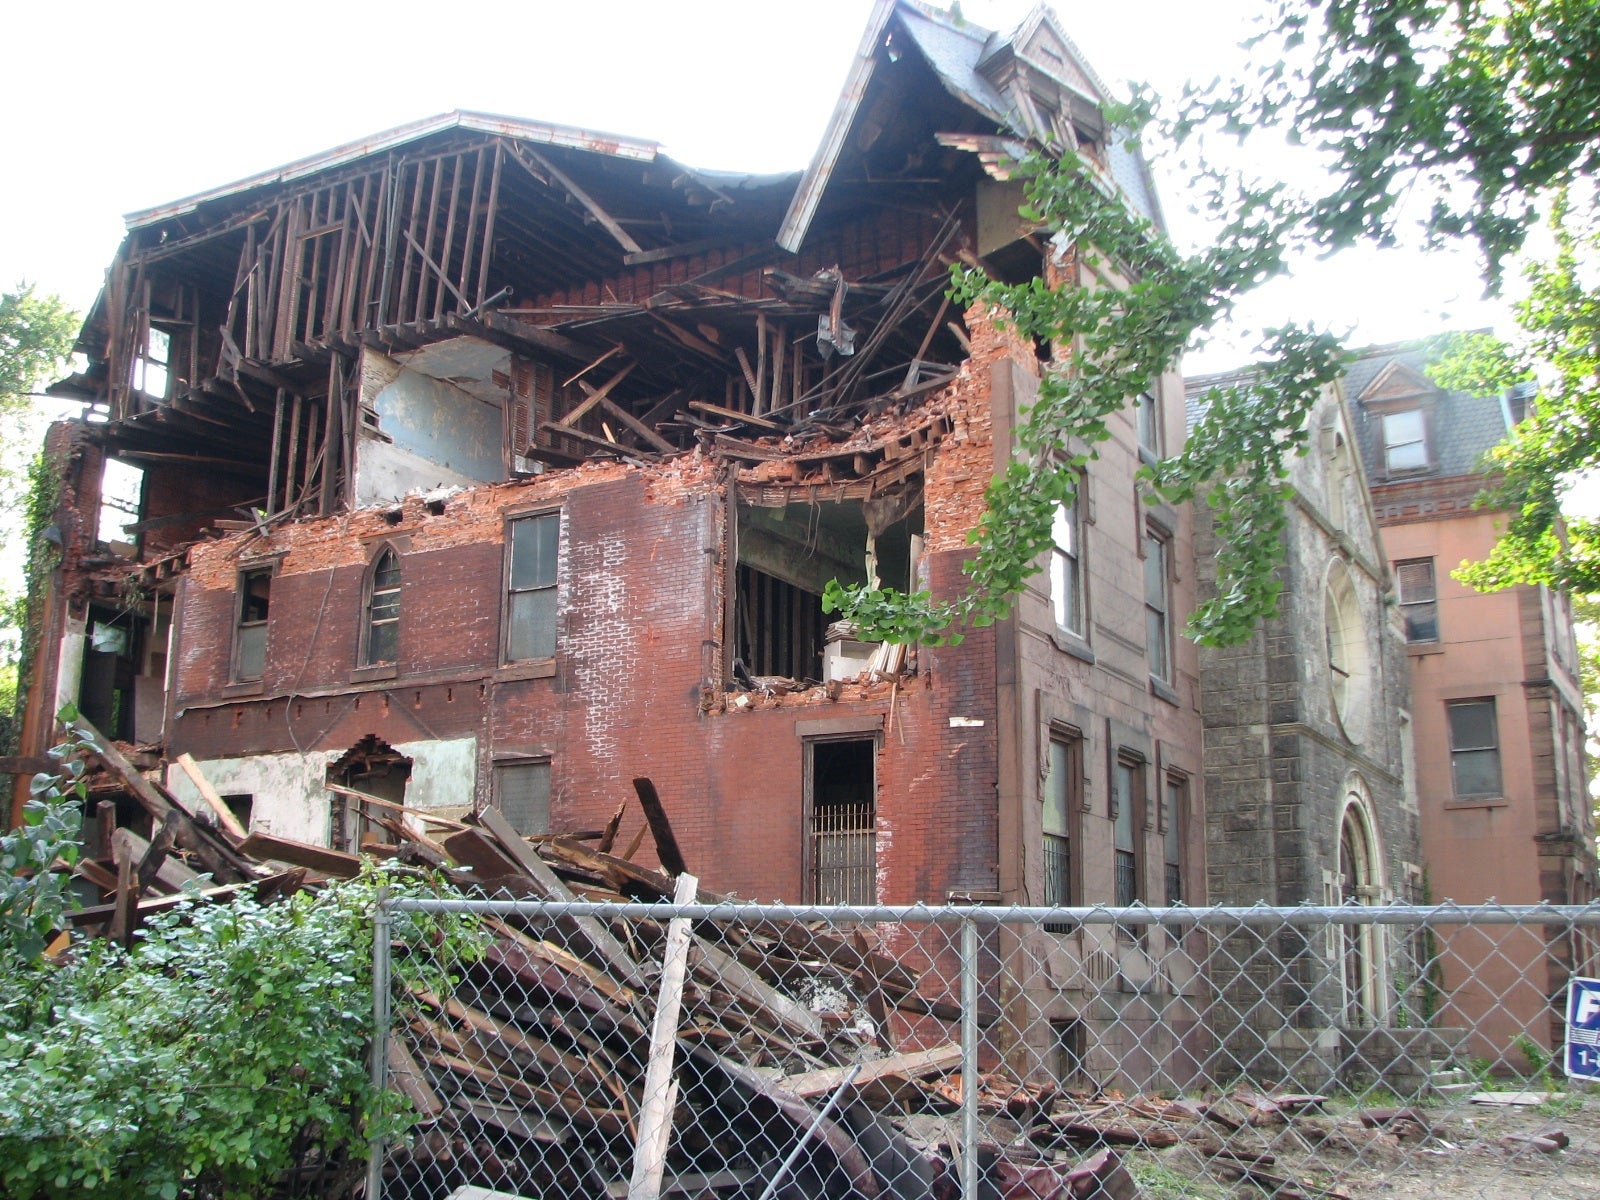 A view of the east side of the Poor Clares complex on Sept. 2.